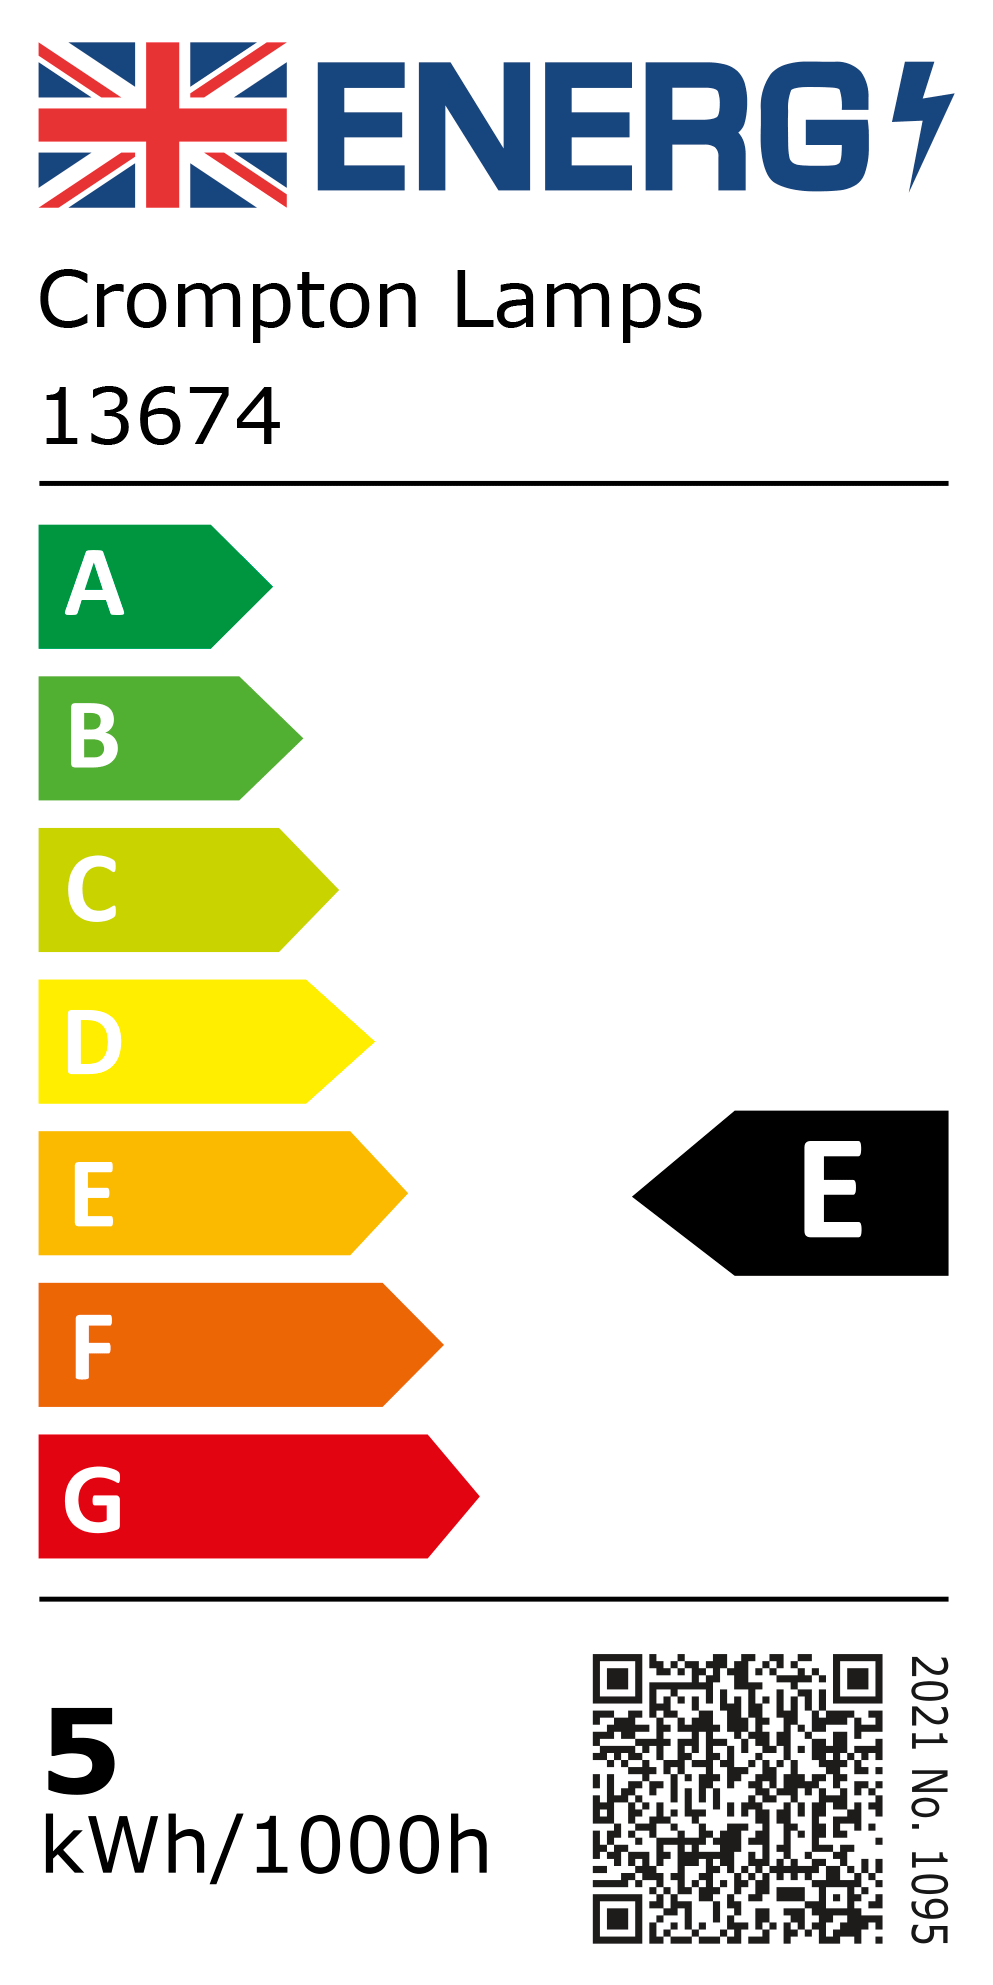 New 2021 Energy Rating Label: Stock Code 13674